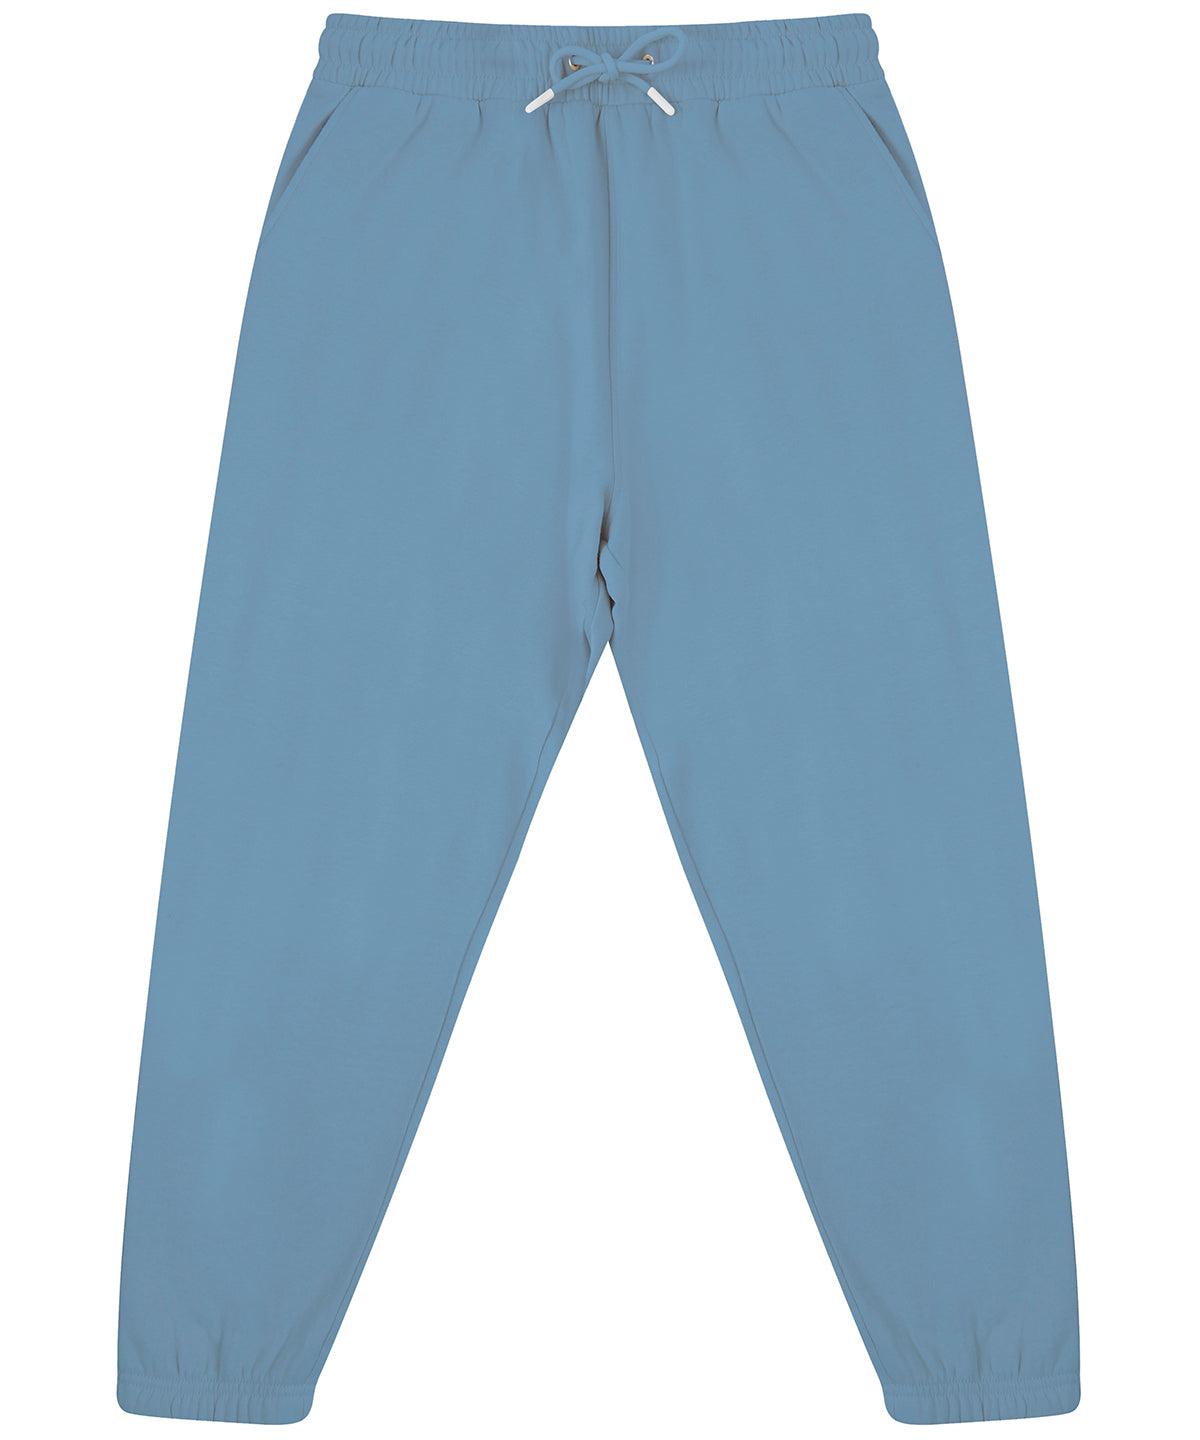 Stone Blue - Unisex sustainable fashion cuffed joggers Sweatpants SF Home Comforts, Joggers, New Styles For 2022, Next Gen, Organic & Conscious Schoolwear Centres